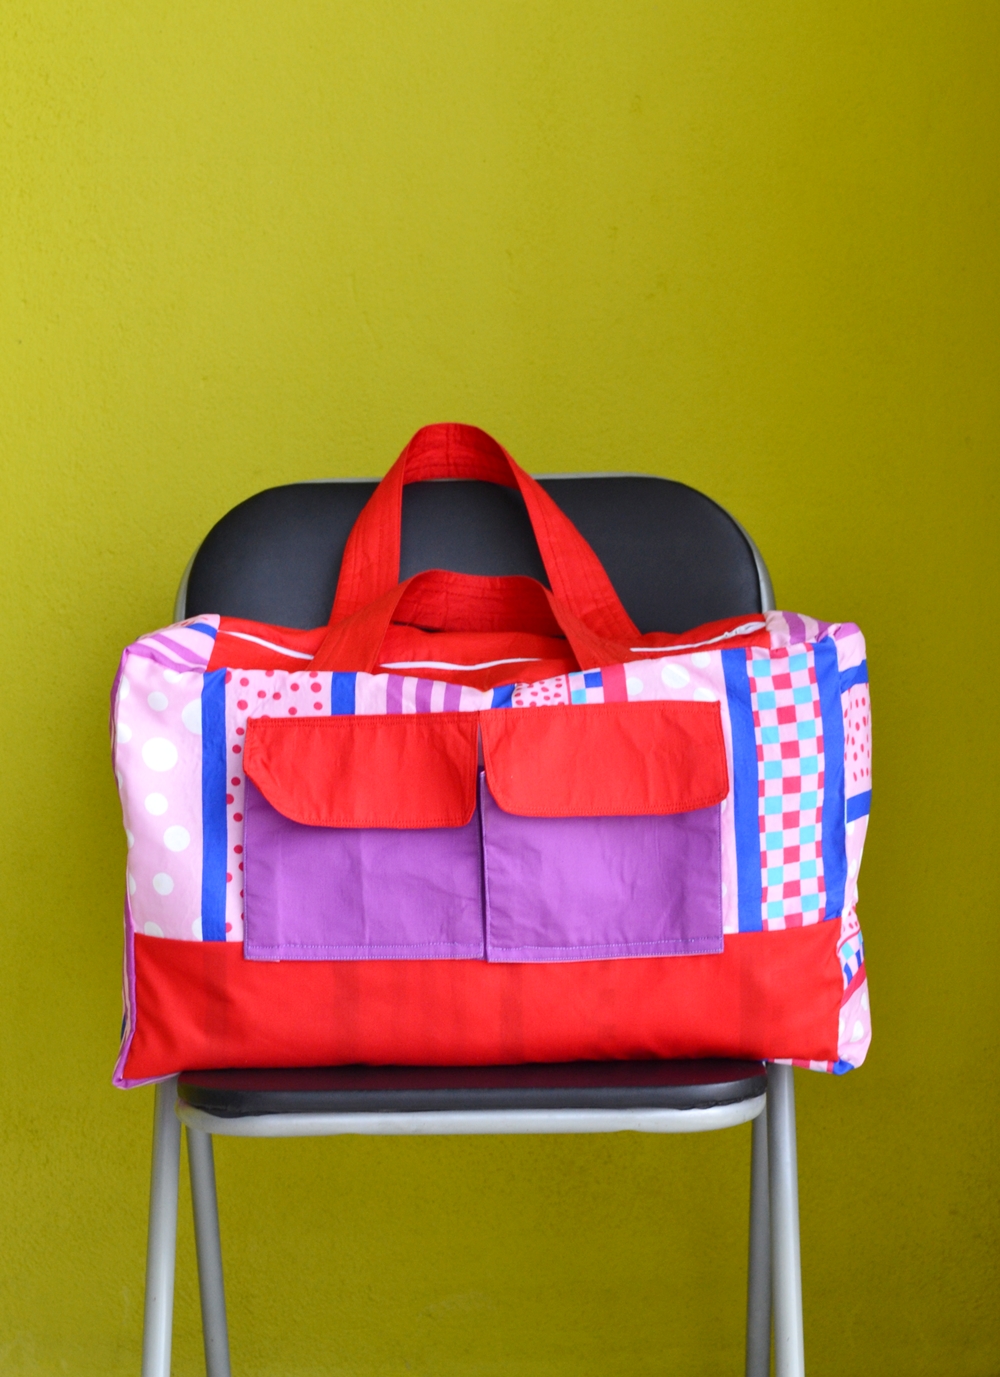 Duffle Bag from Pillow Cover (Free Sewing Pattern) on believeninspire.com